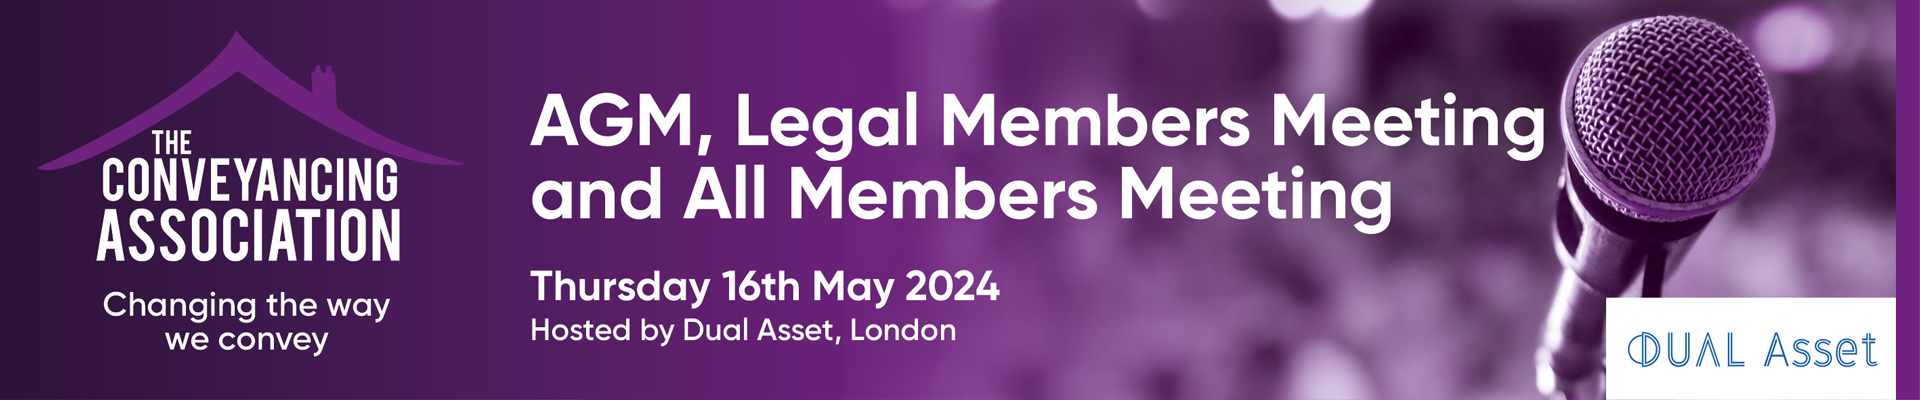 AGM, Legal and All Member Meeting